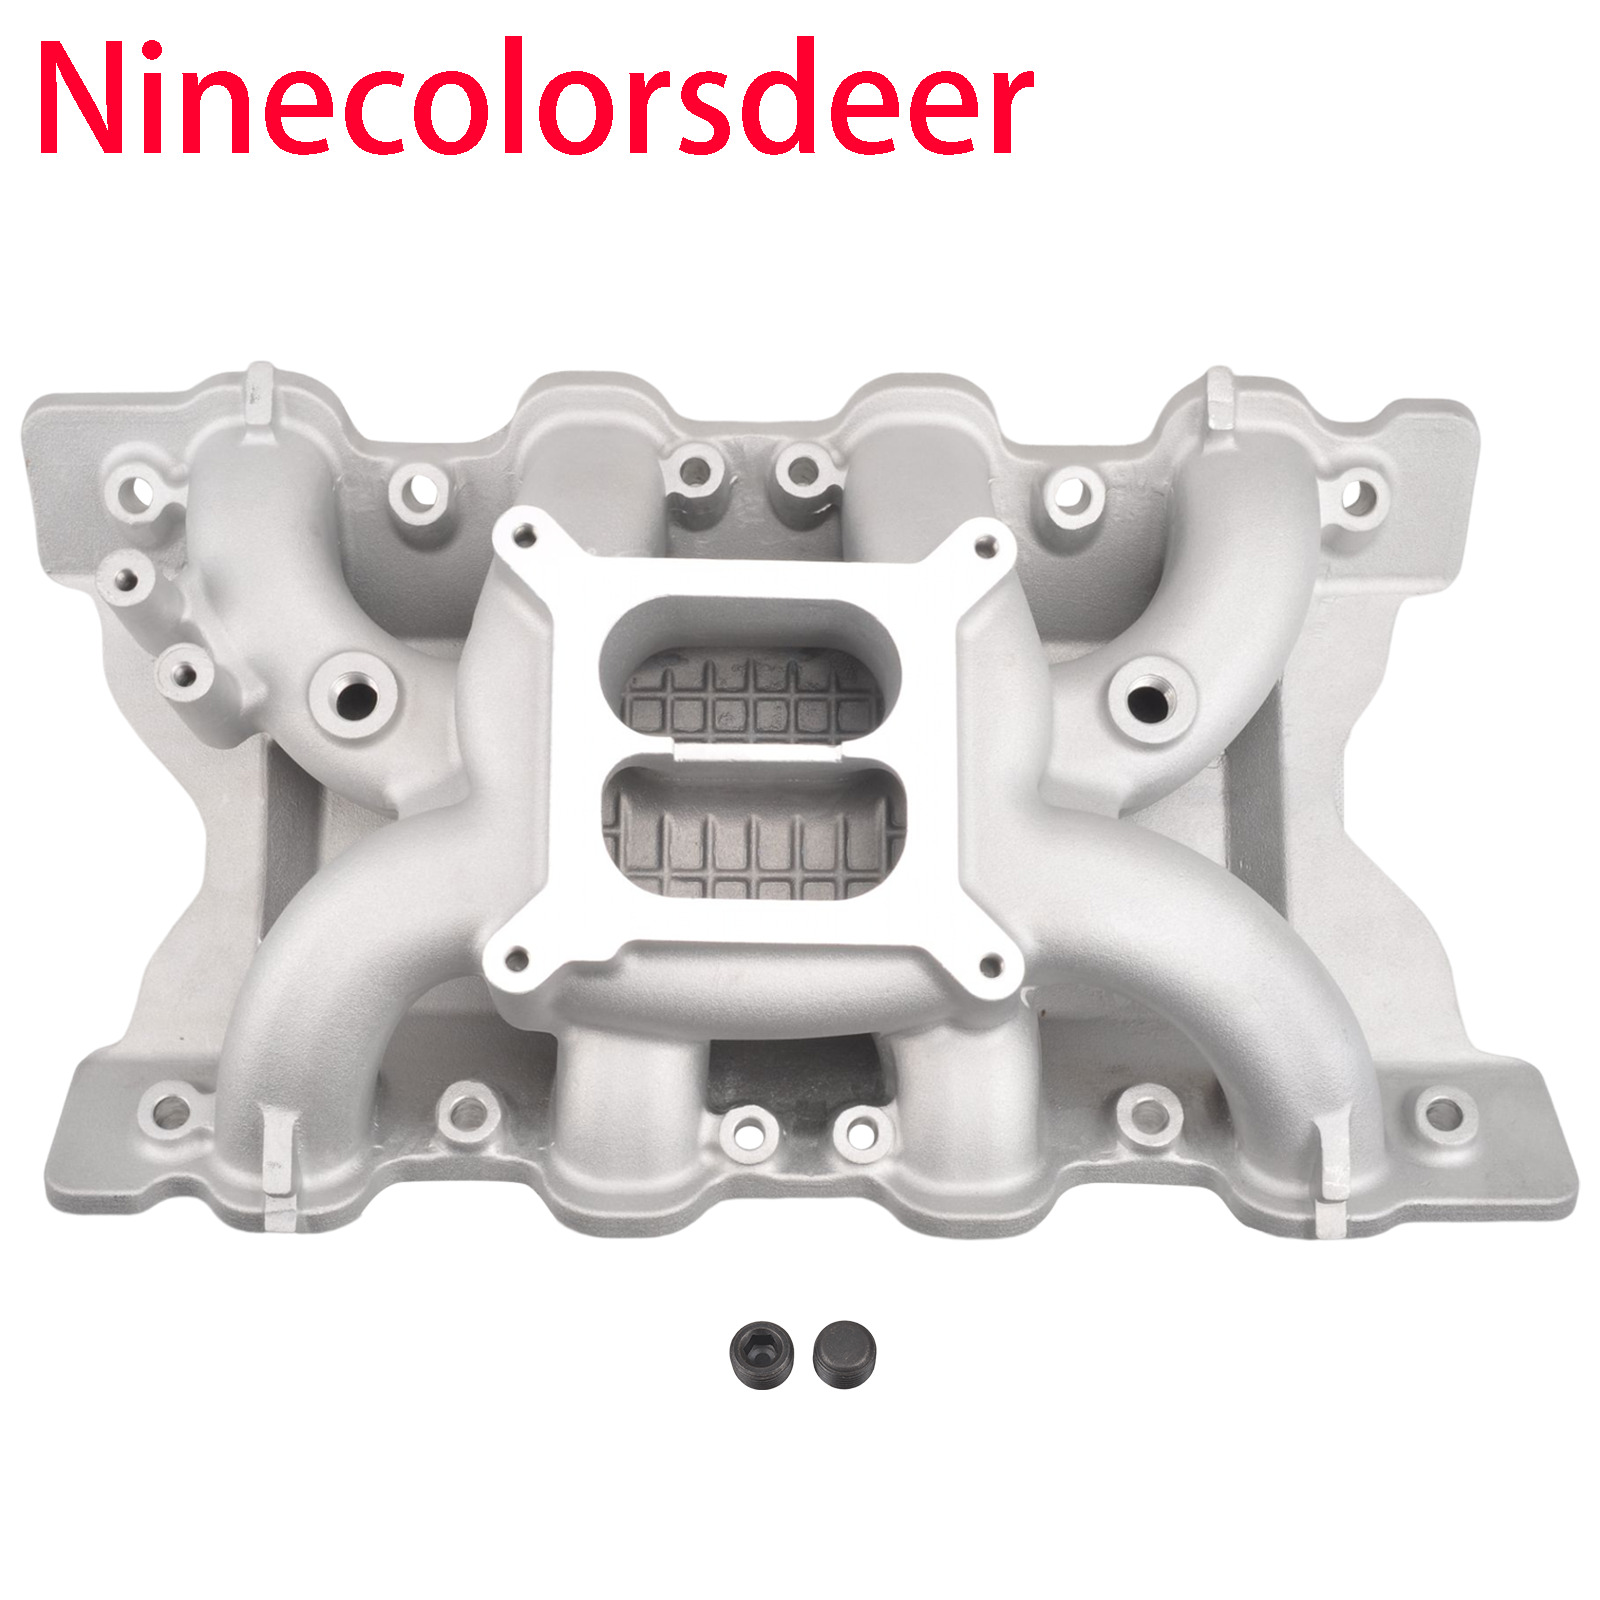 Aluminum Intake Manifold RPM Air-Gap Oval Port for1970-1986 Ford 351C